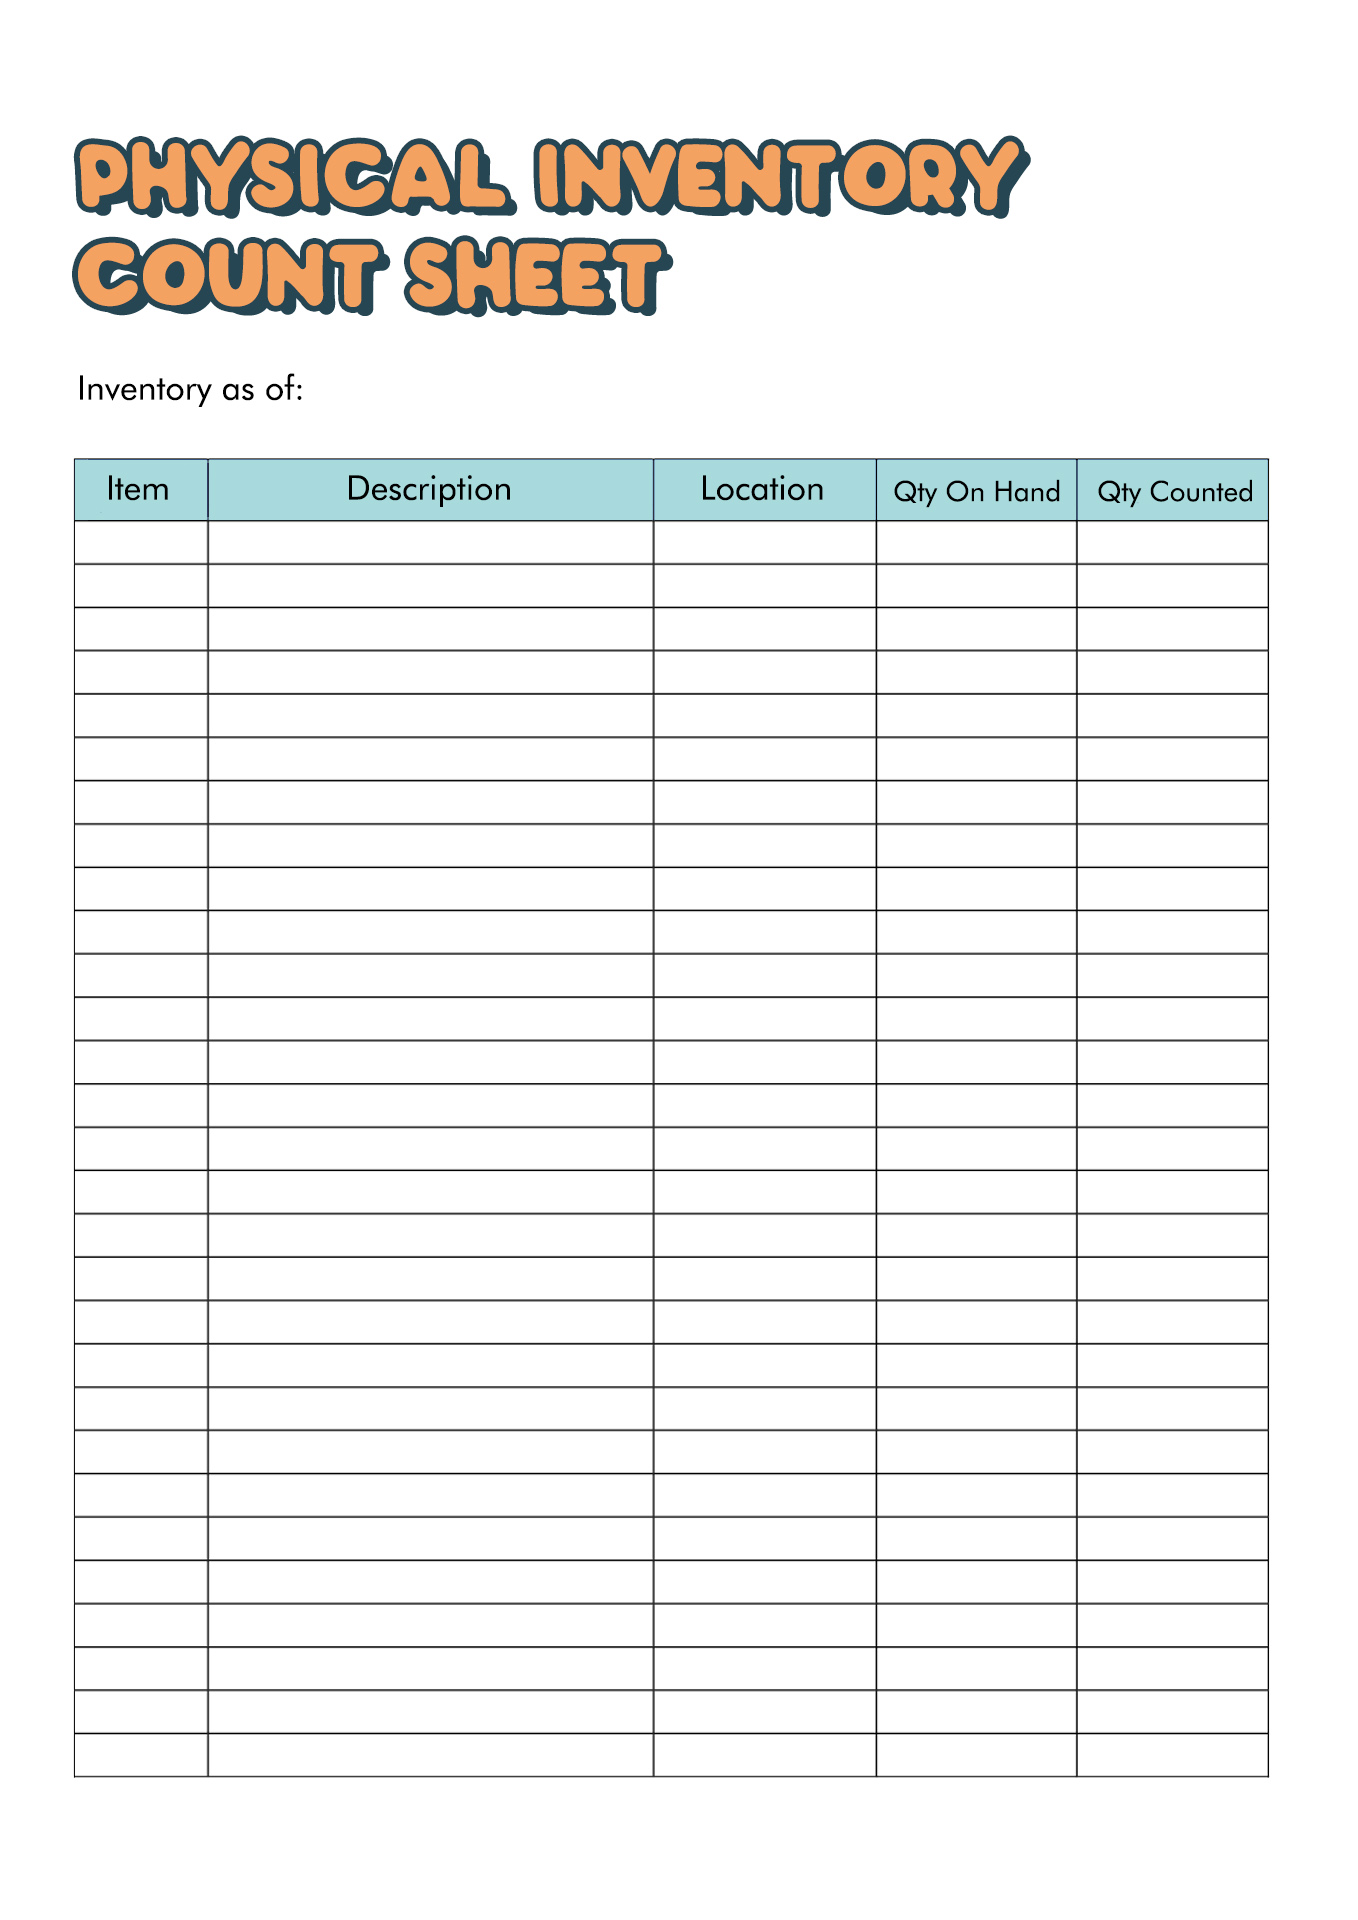 18 Best Images of Inventory Worksheet Template - Blank ...